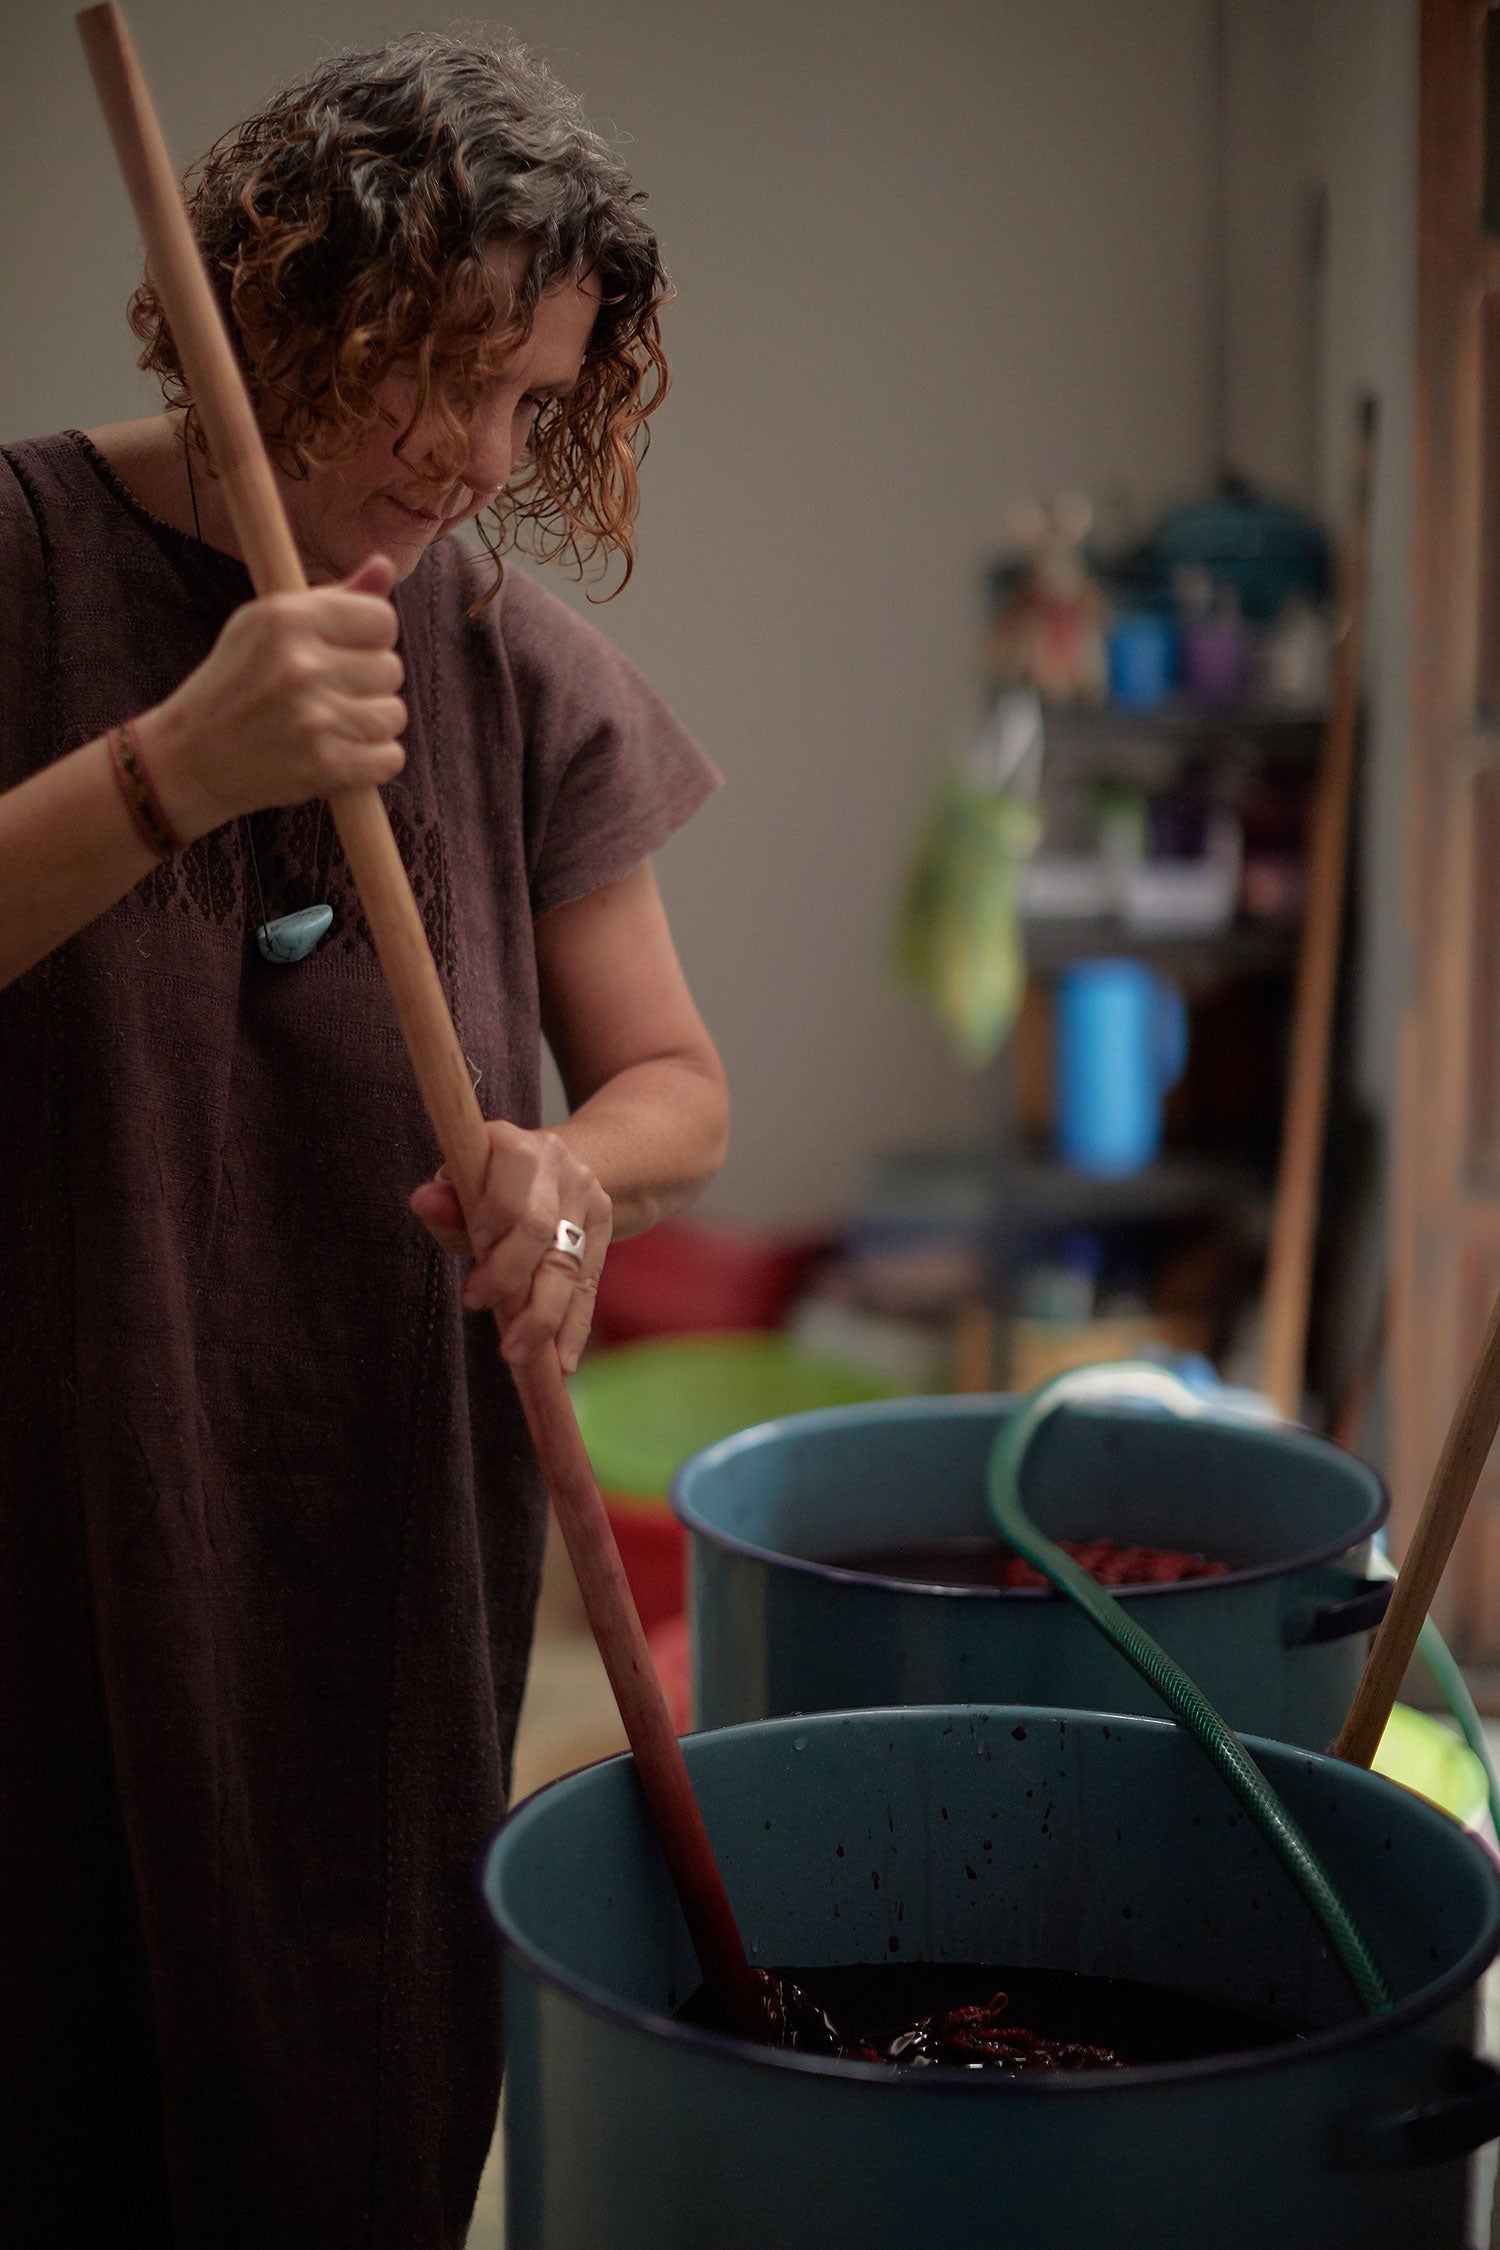 Dyed in the wool — natural dyes are an essential part of Maddalena's practise